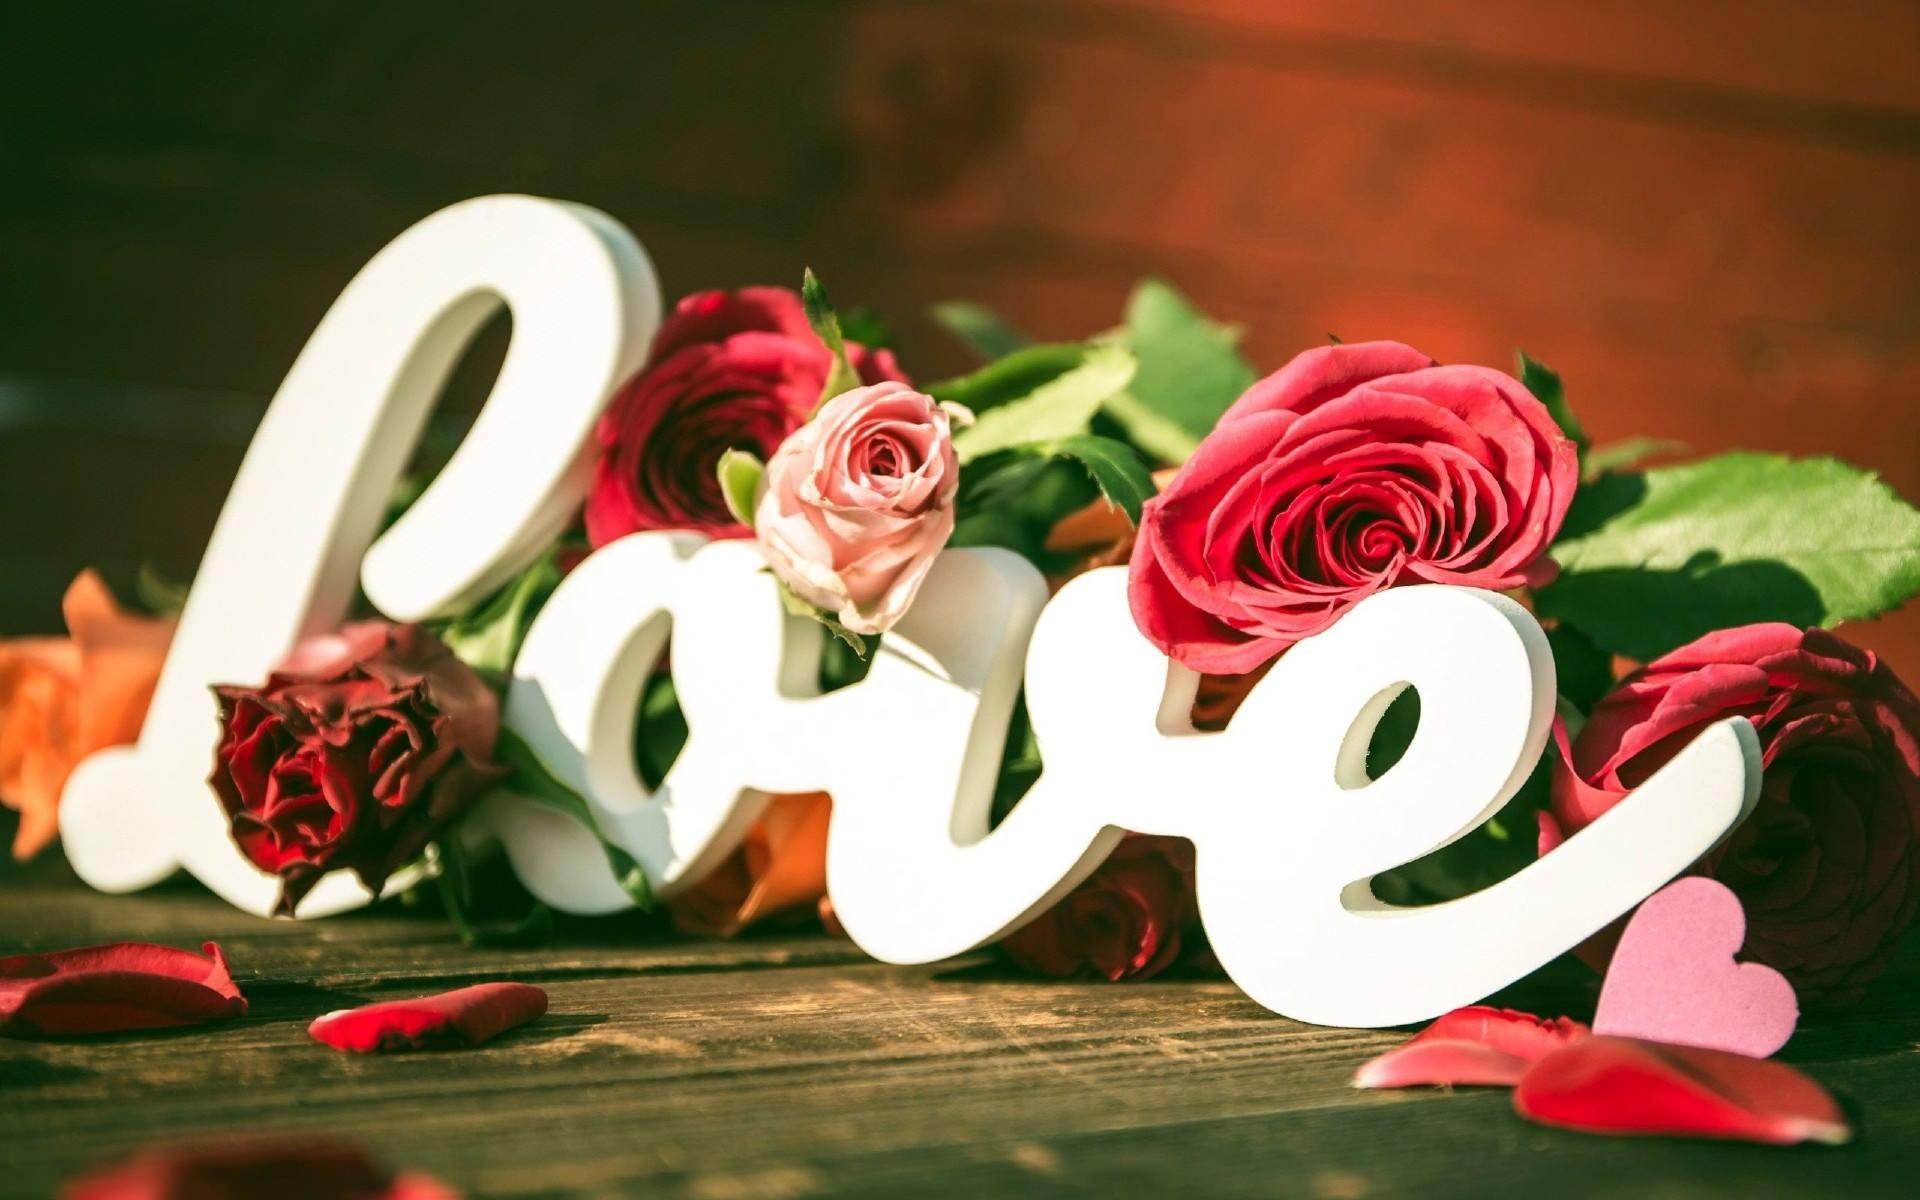 Love cursive write with pink and red rose flowers. HD Wallpaper Rocks